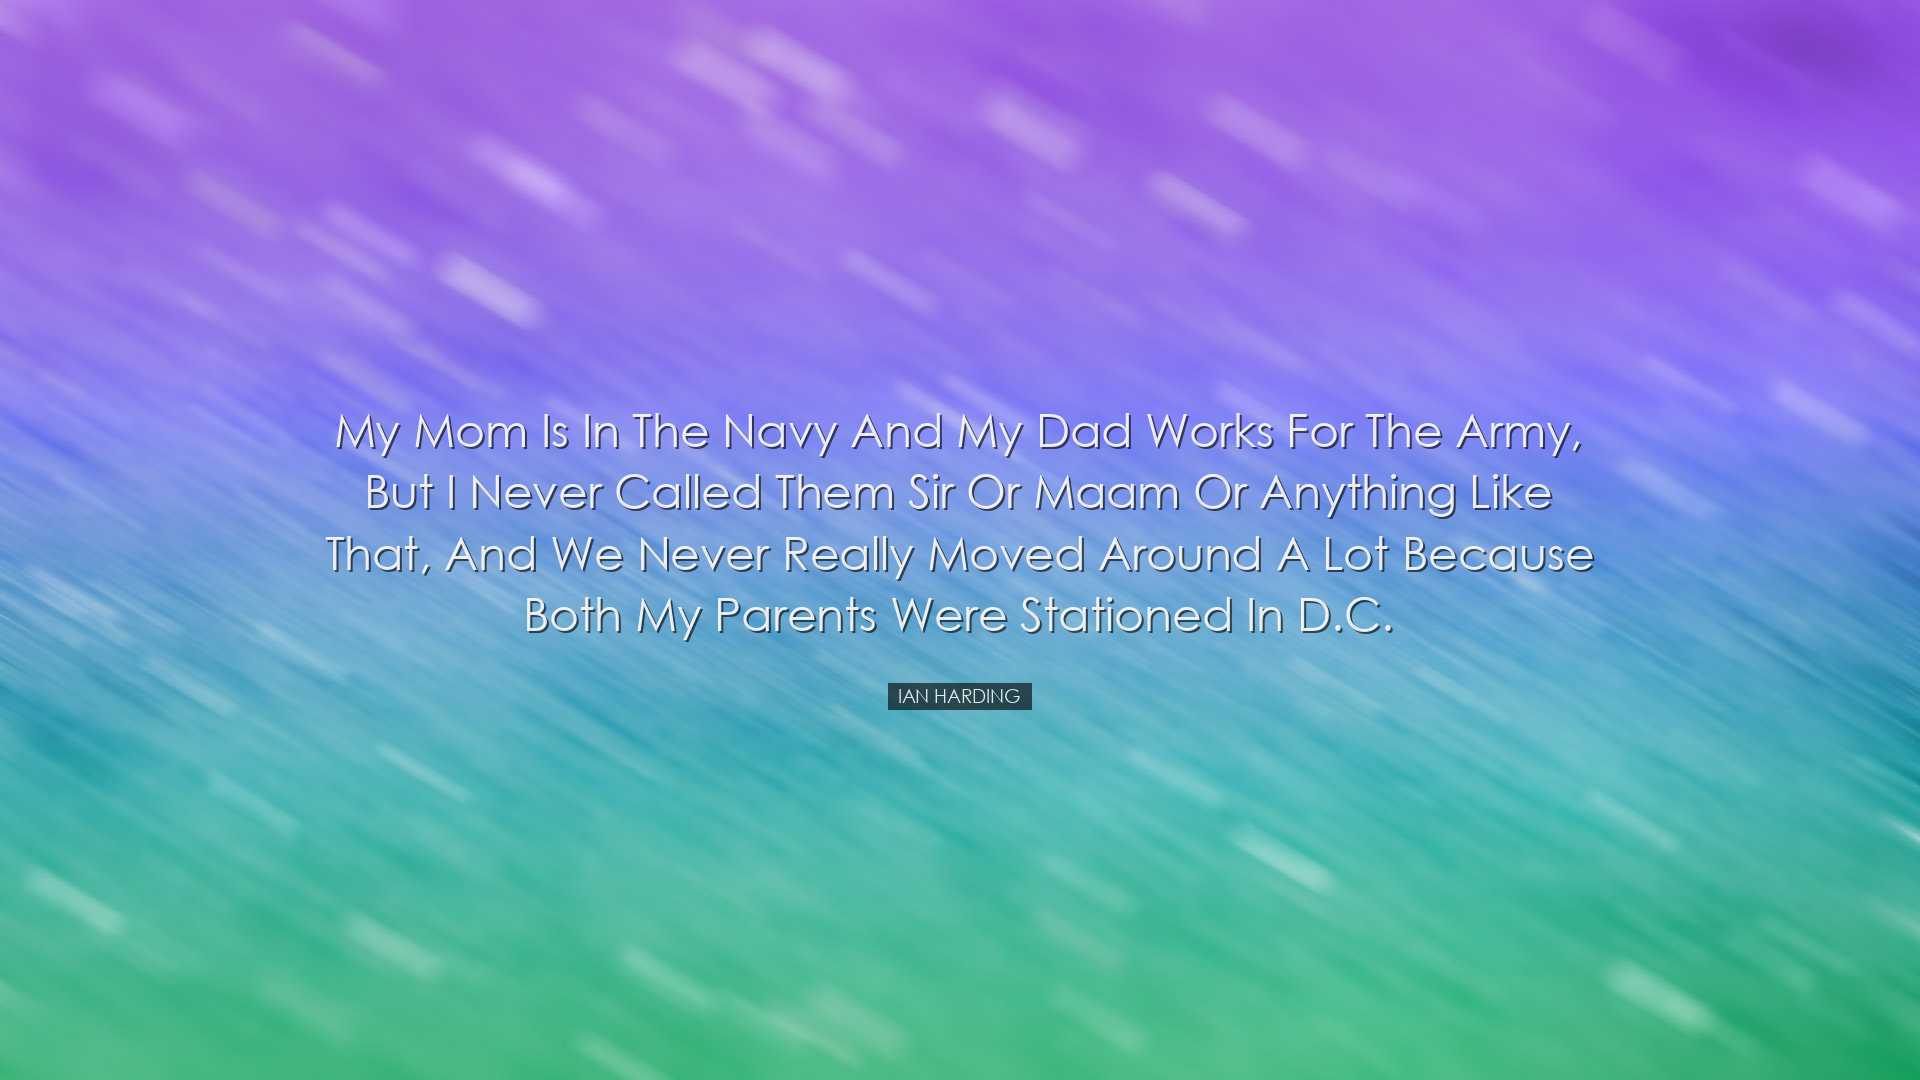 My mom is in the navy and my dad works for the army, but I never c